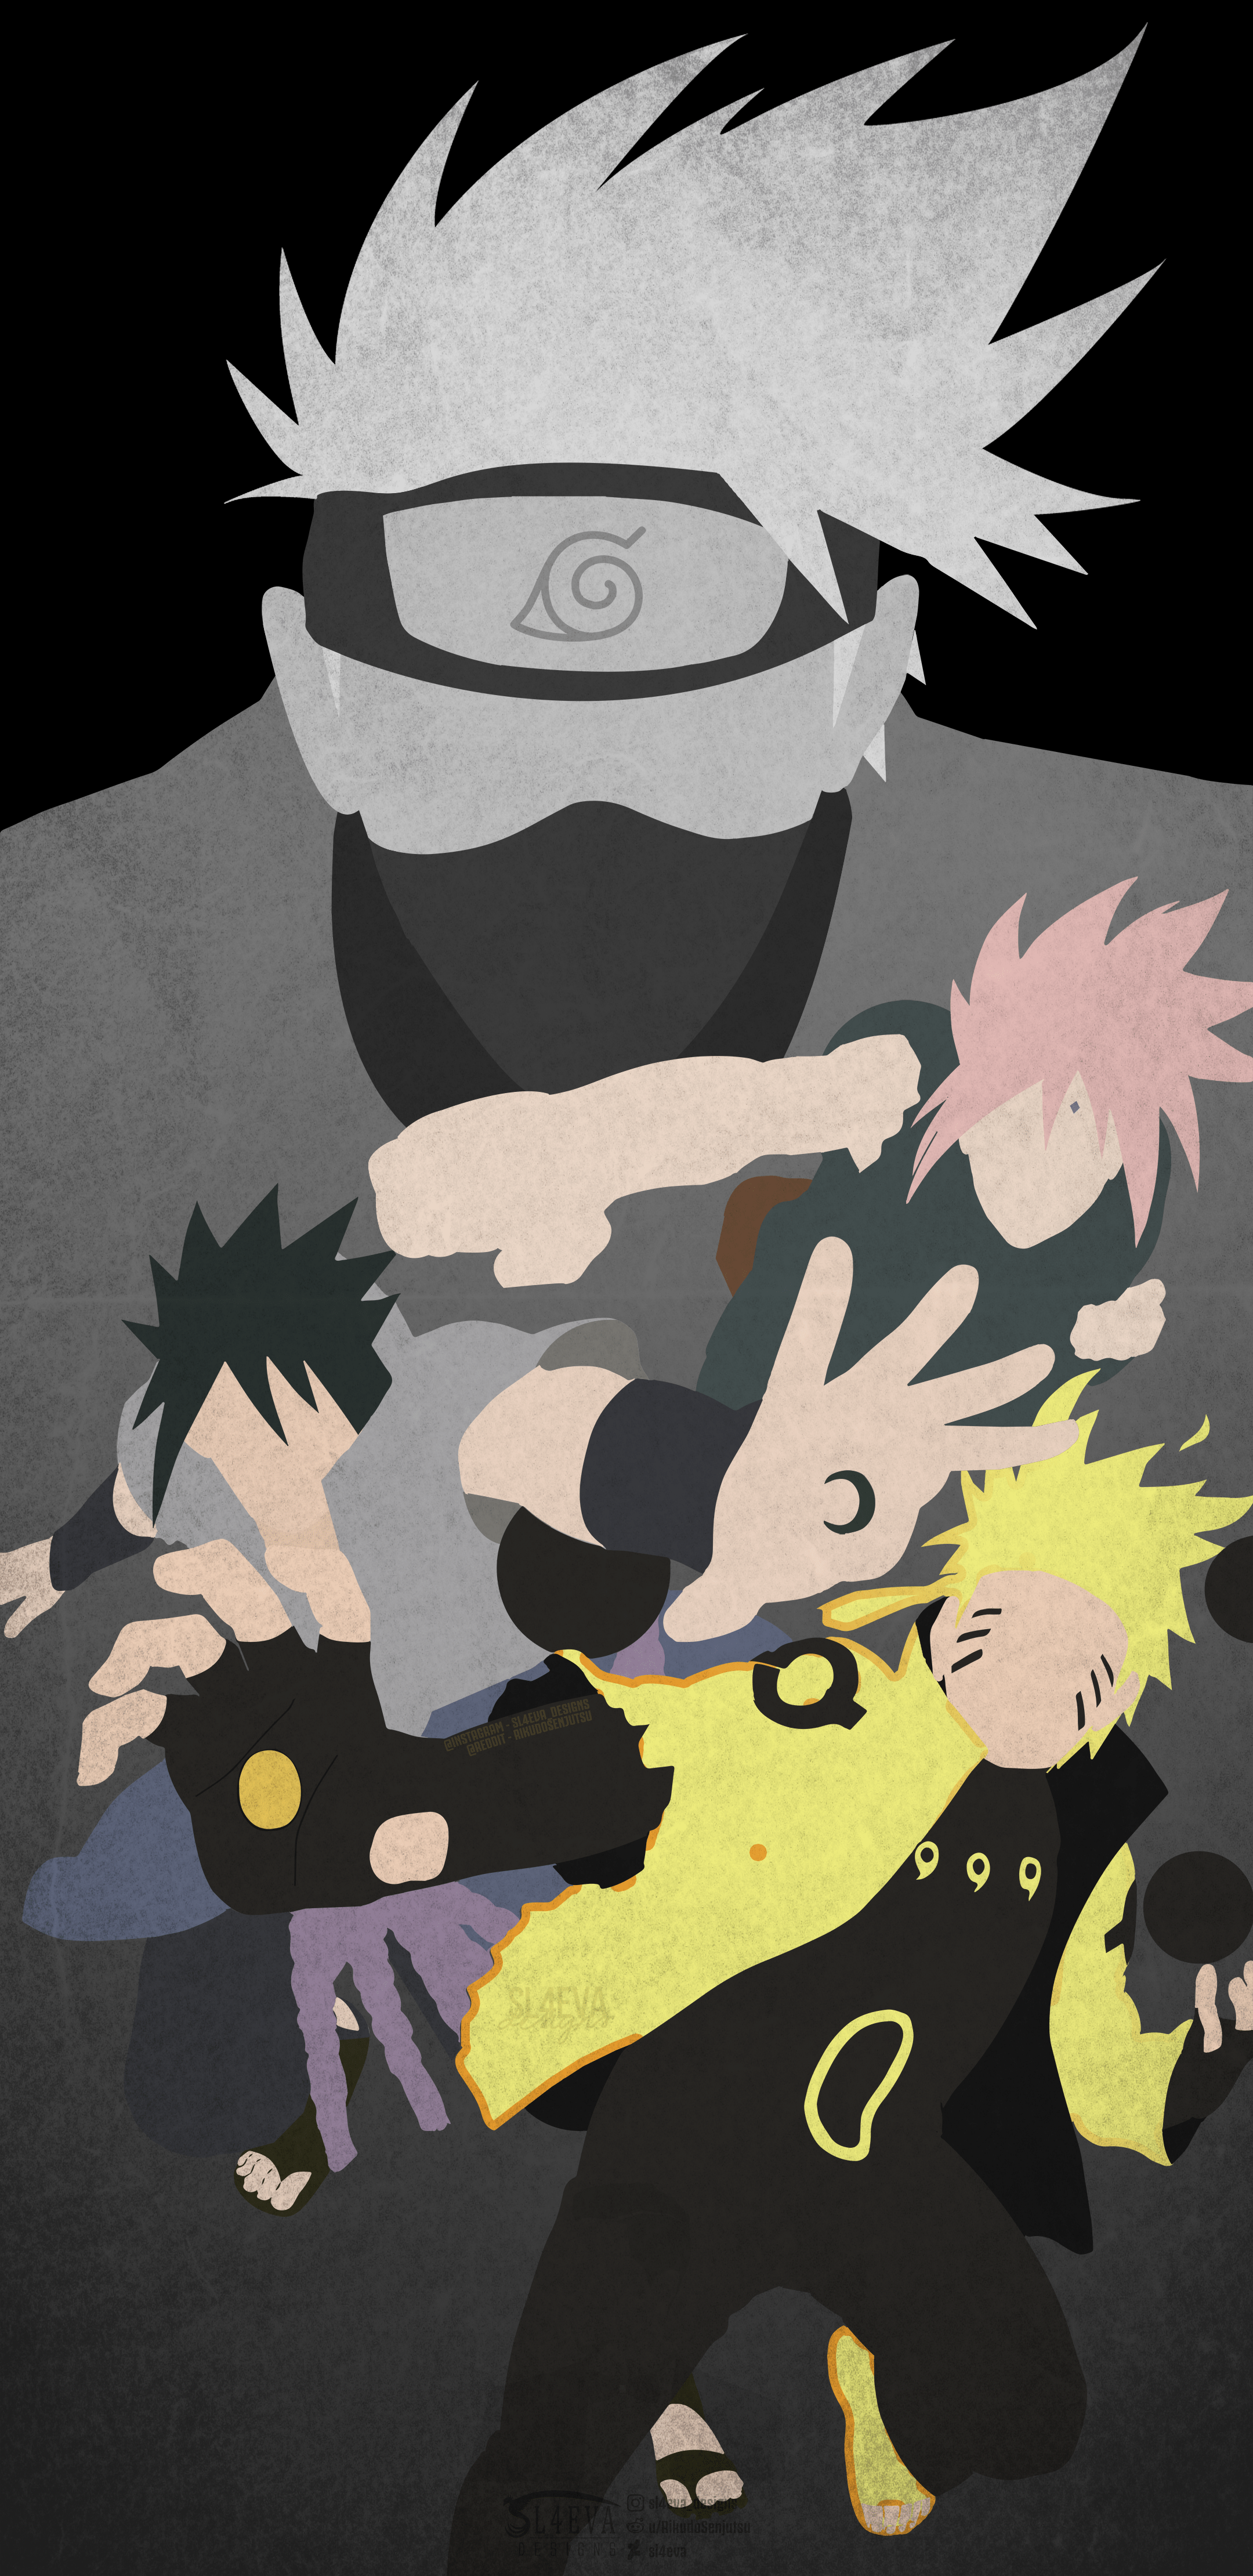 Team 7 Naruto iPhone Wallpapers - Top Free Team 7 Naruto iPhone Backgrounds  - WallpaperAccess